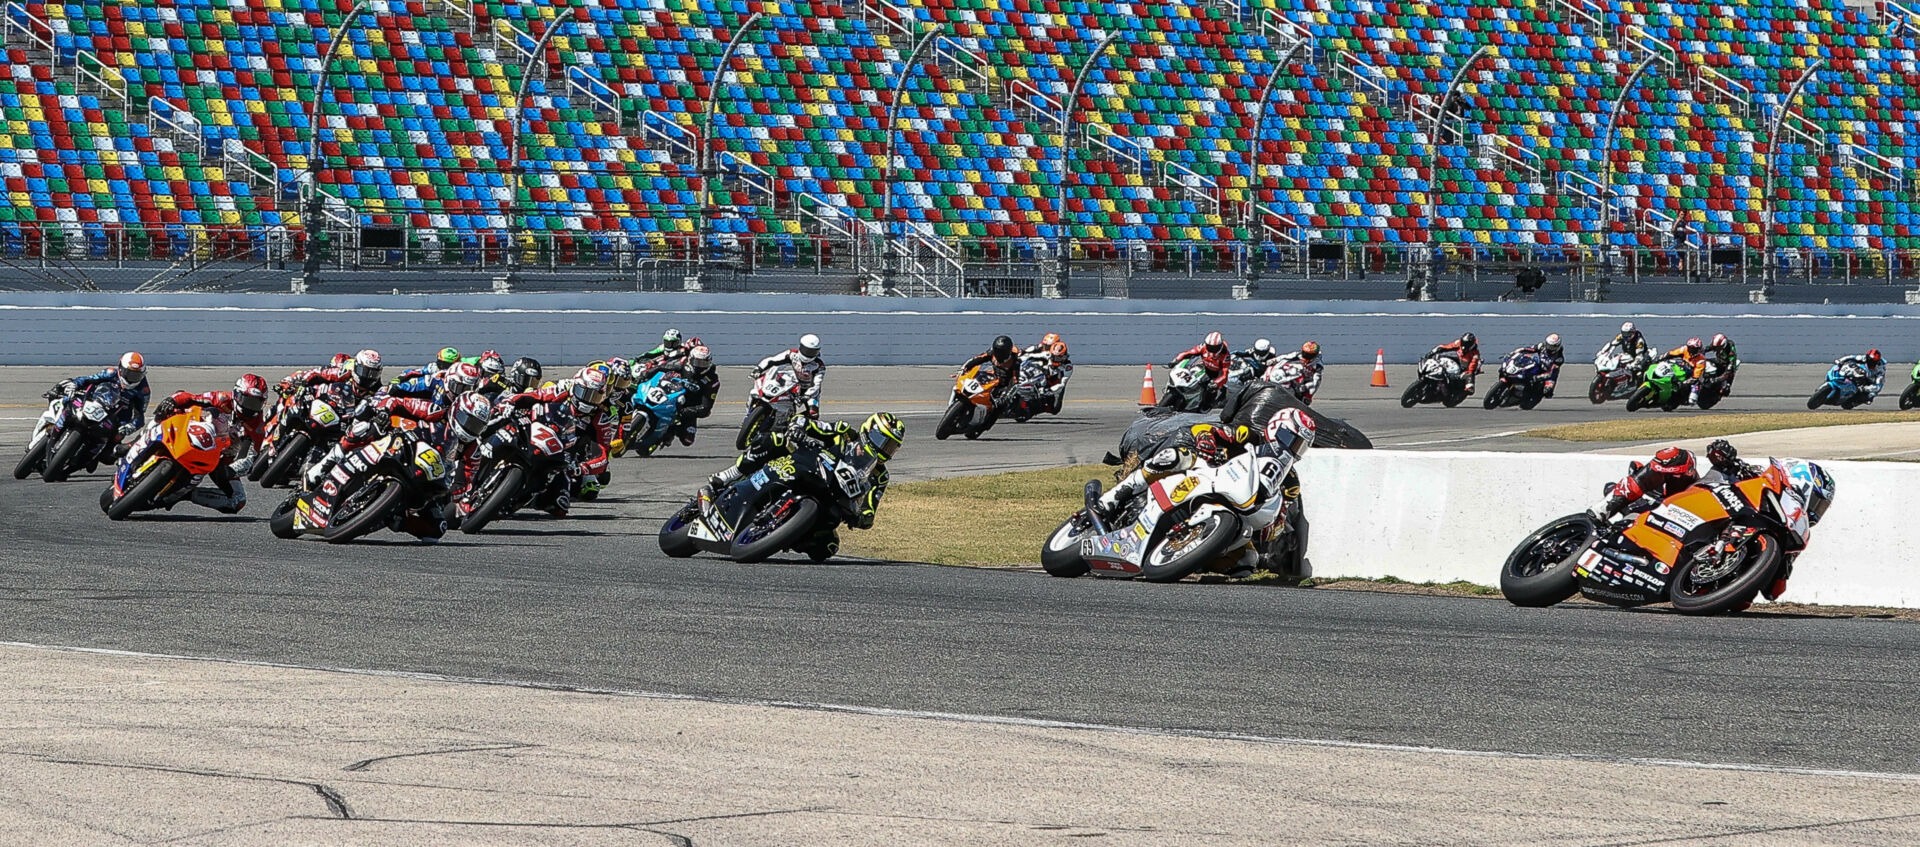 The original start of the 81st Daytona 200 with Josh Herrin (1) leading Danny Eslick (69), PJ Jacobsen (66), Richie Escalante (54), Tyler Scott (70), Geoff May (99), and the rest through Turn One. Photo by Brian J. Nelson.